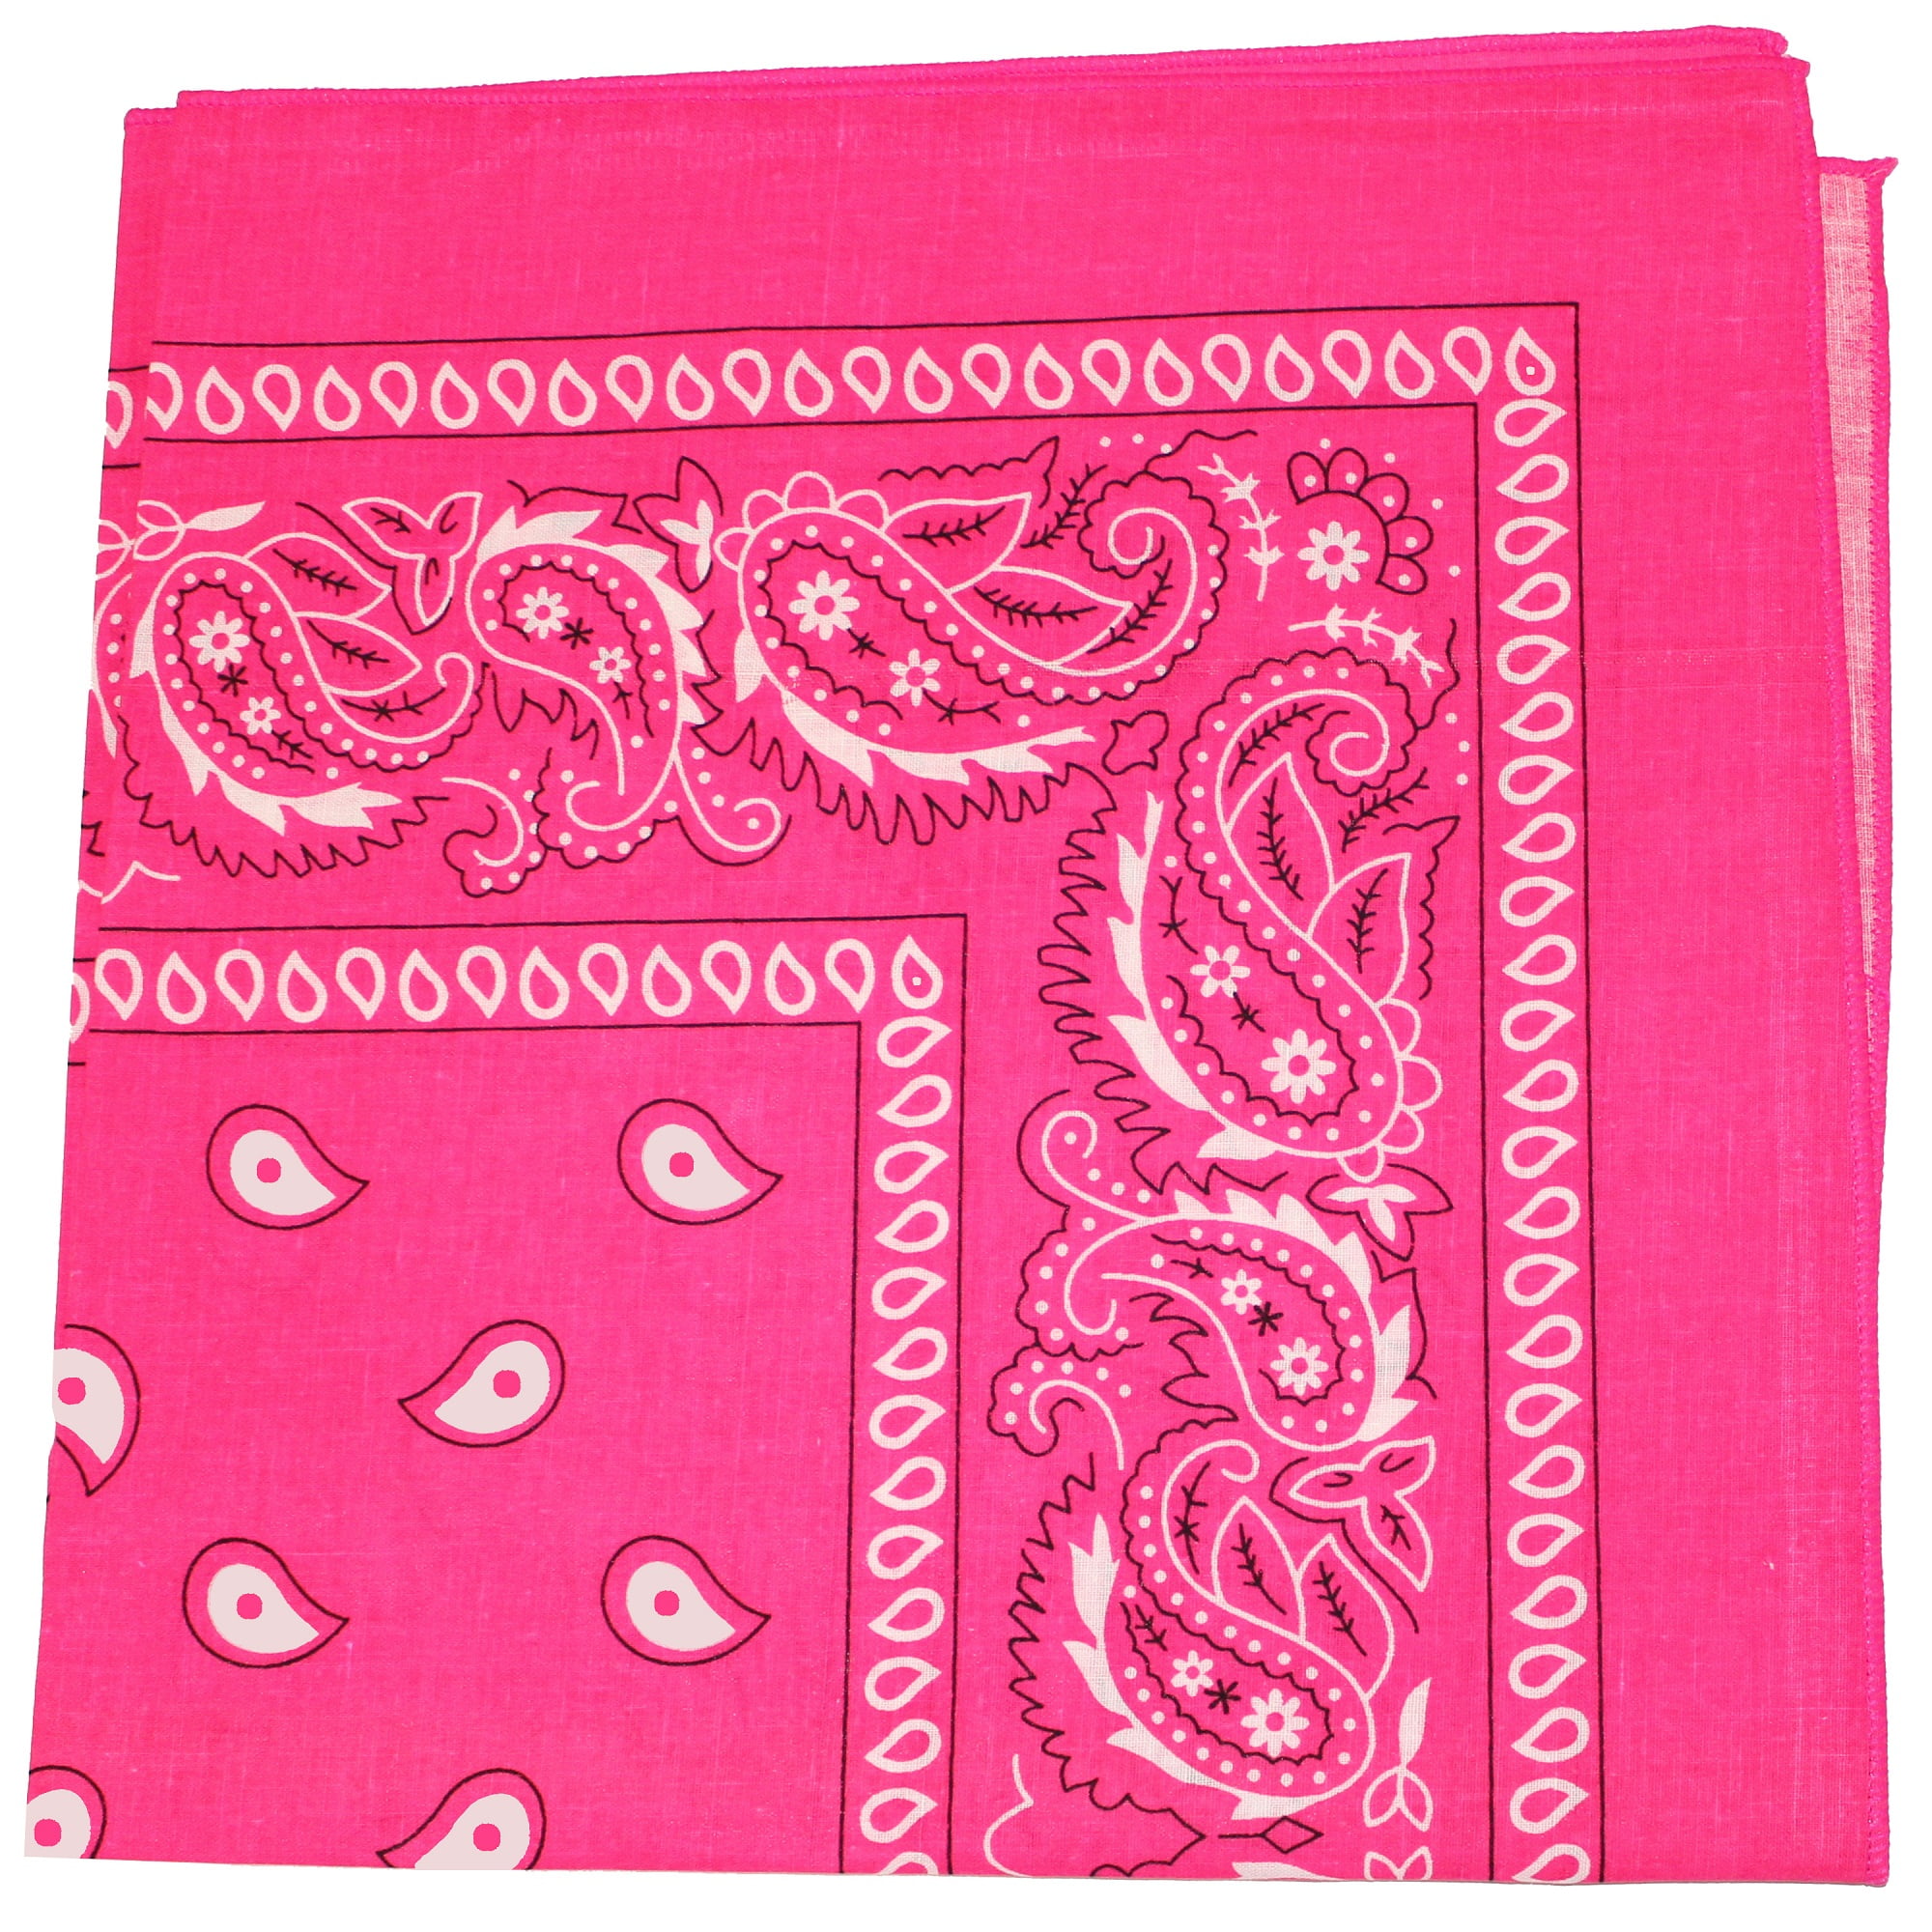 Pack of 3 Paisley 100% Cotton Double Sided Bandana 22 inches 